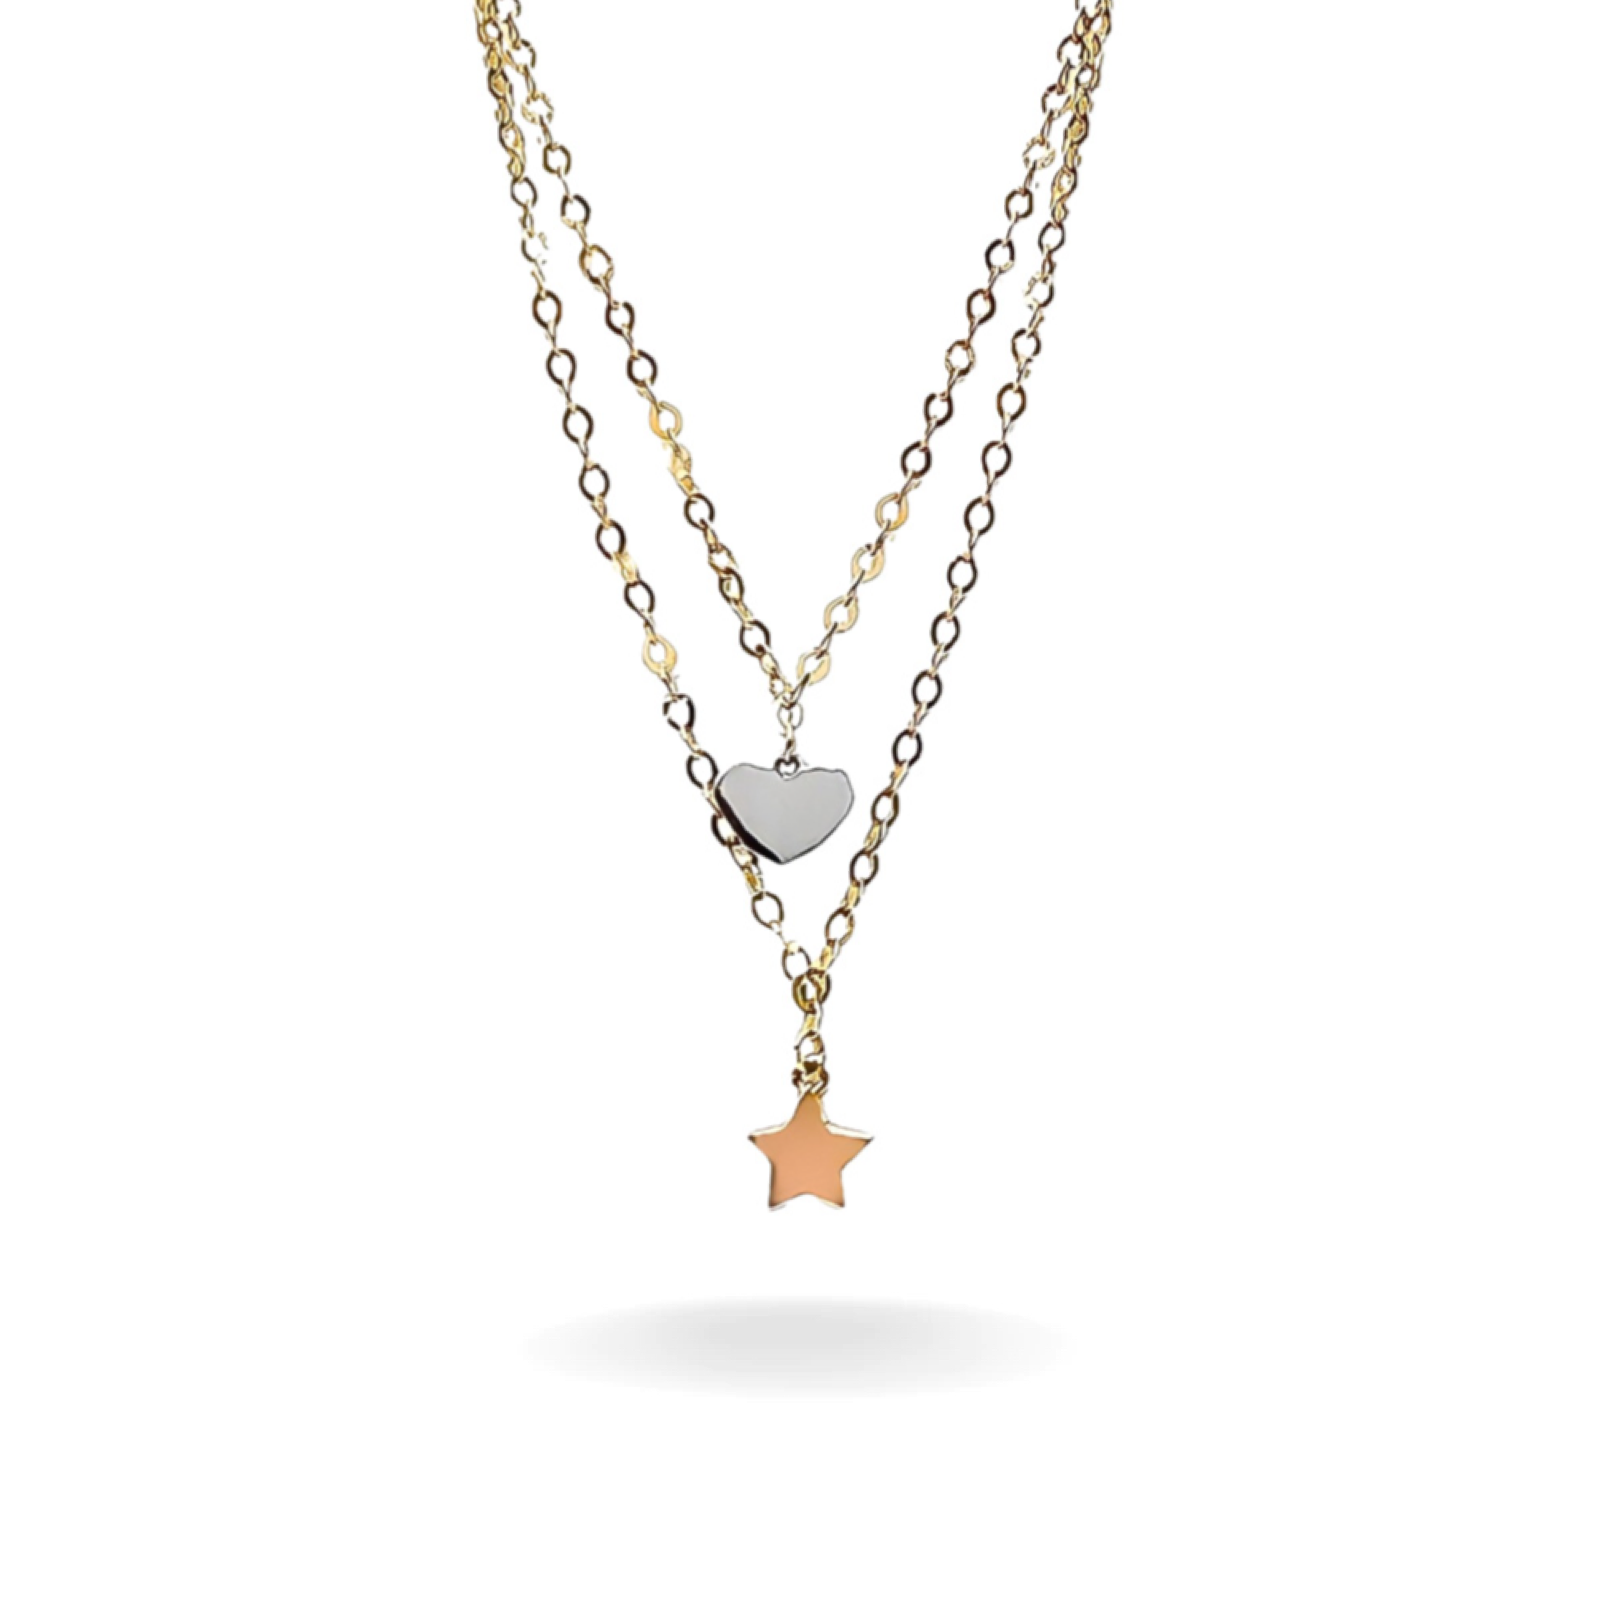 14K YELLOW GOLD HEART & STAR CHARMED DOUBLE NECKLACE